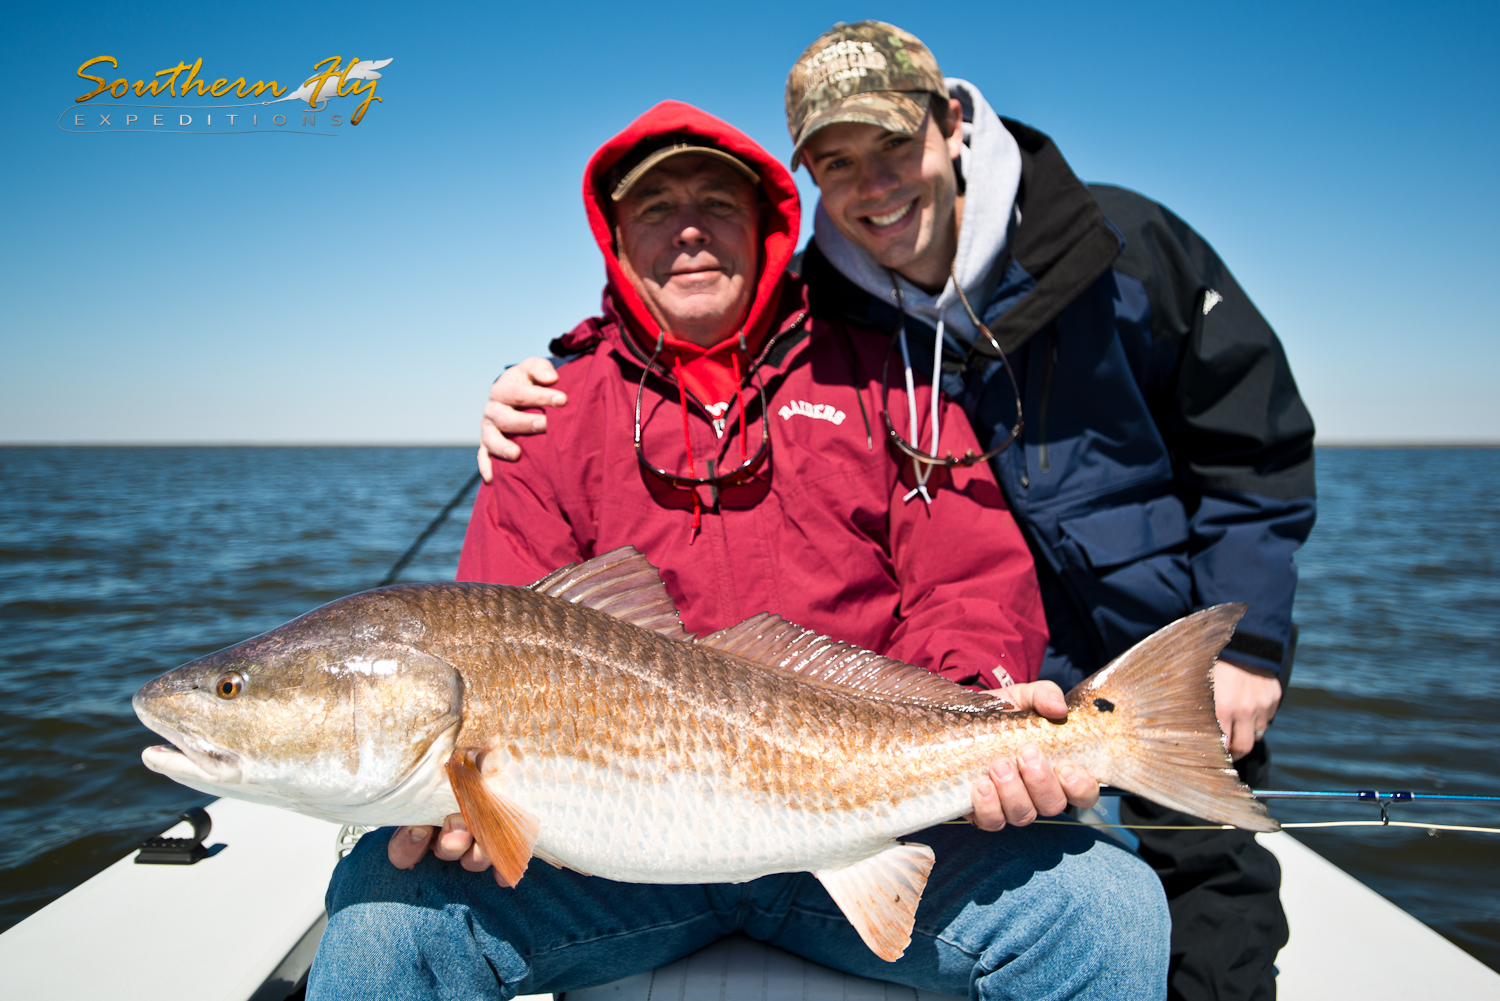 Family Fly Fishing Trip Casting for Redfish Southern Fly Expeditions Fishing New Orleans 